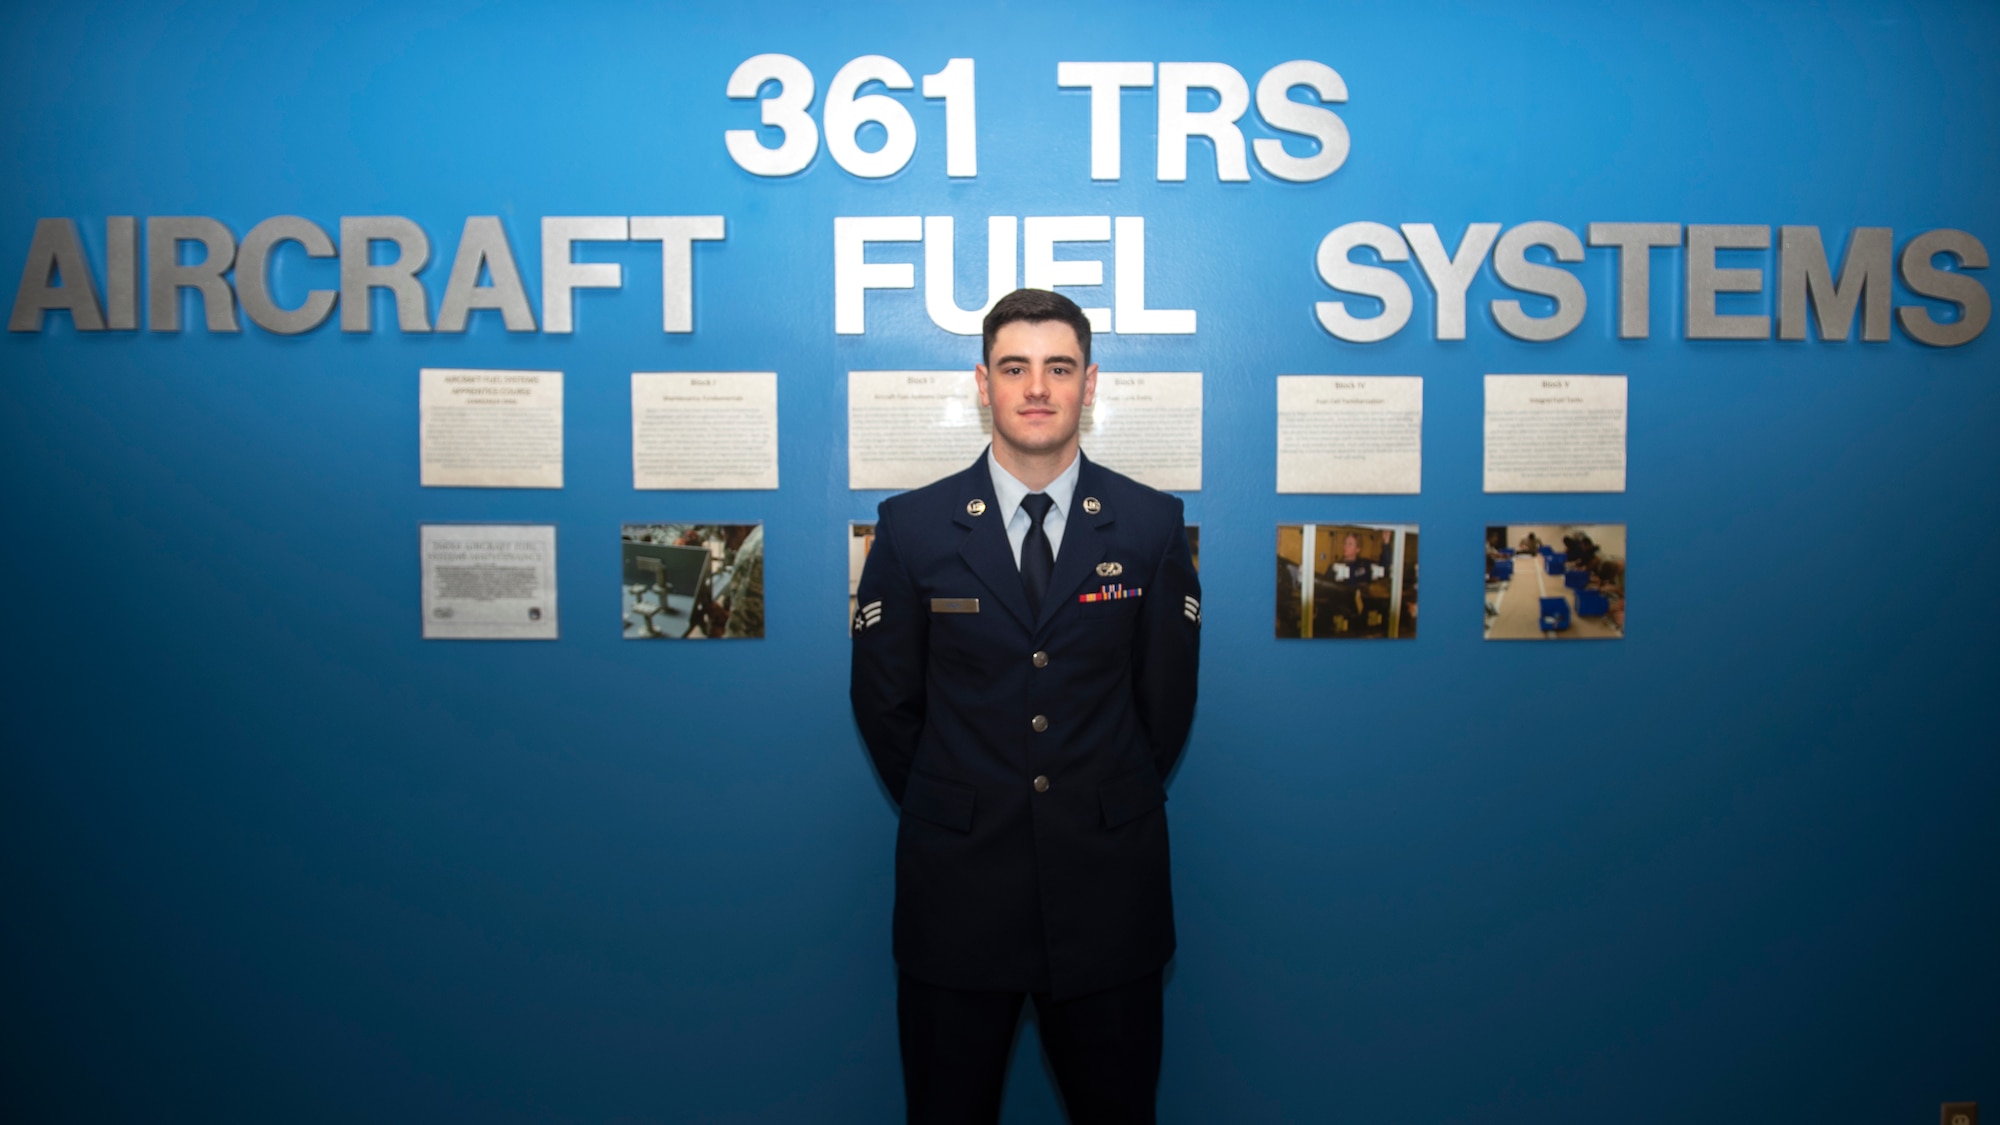 Senior Airman James Irons, 361st Training Squadron aircraft fuel apprentice course student, poses for a photo at Sheppard Air Force Base, Texas, May 3, 2019. Irons scored 100s on each of his five block tests earning him the Ace Award after graduating his technical training school. (U.S. Air Force photo by Airman 1st Class Pedro Tenorio)